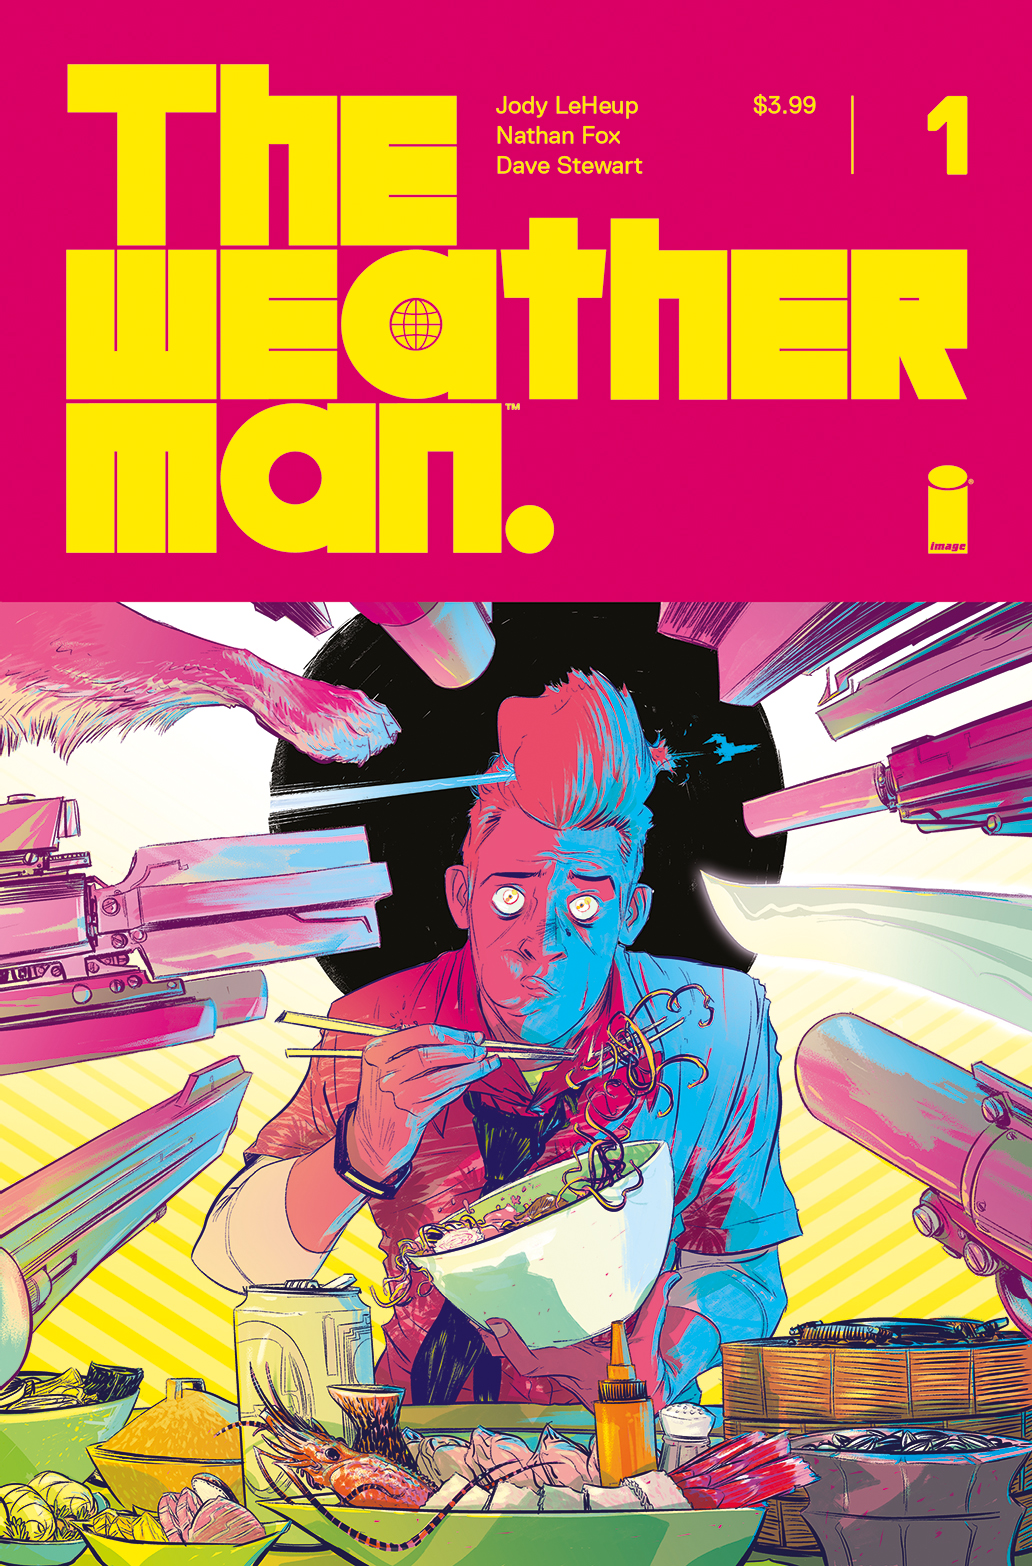 Meet The Wild Characters Of The Weatherman, The New Sci-Fi Comic From Image